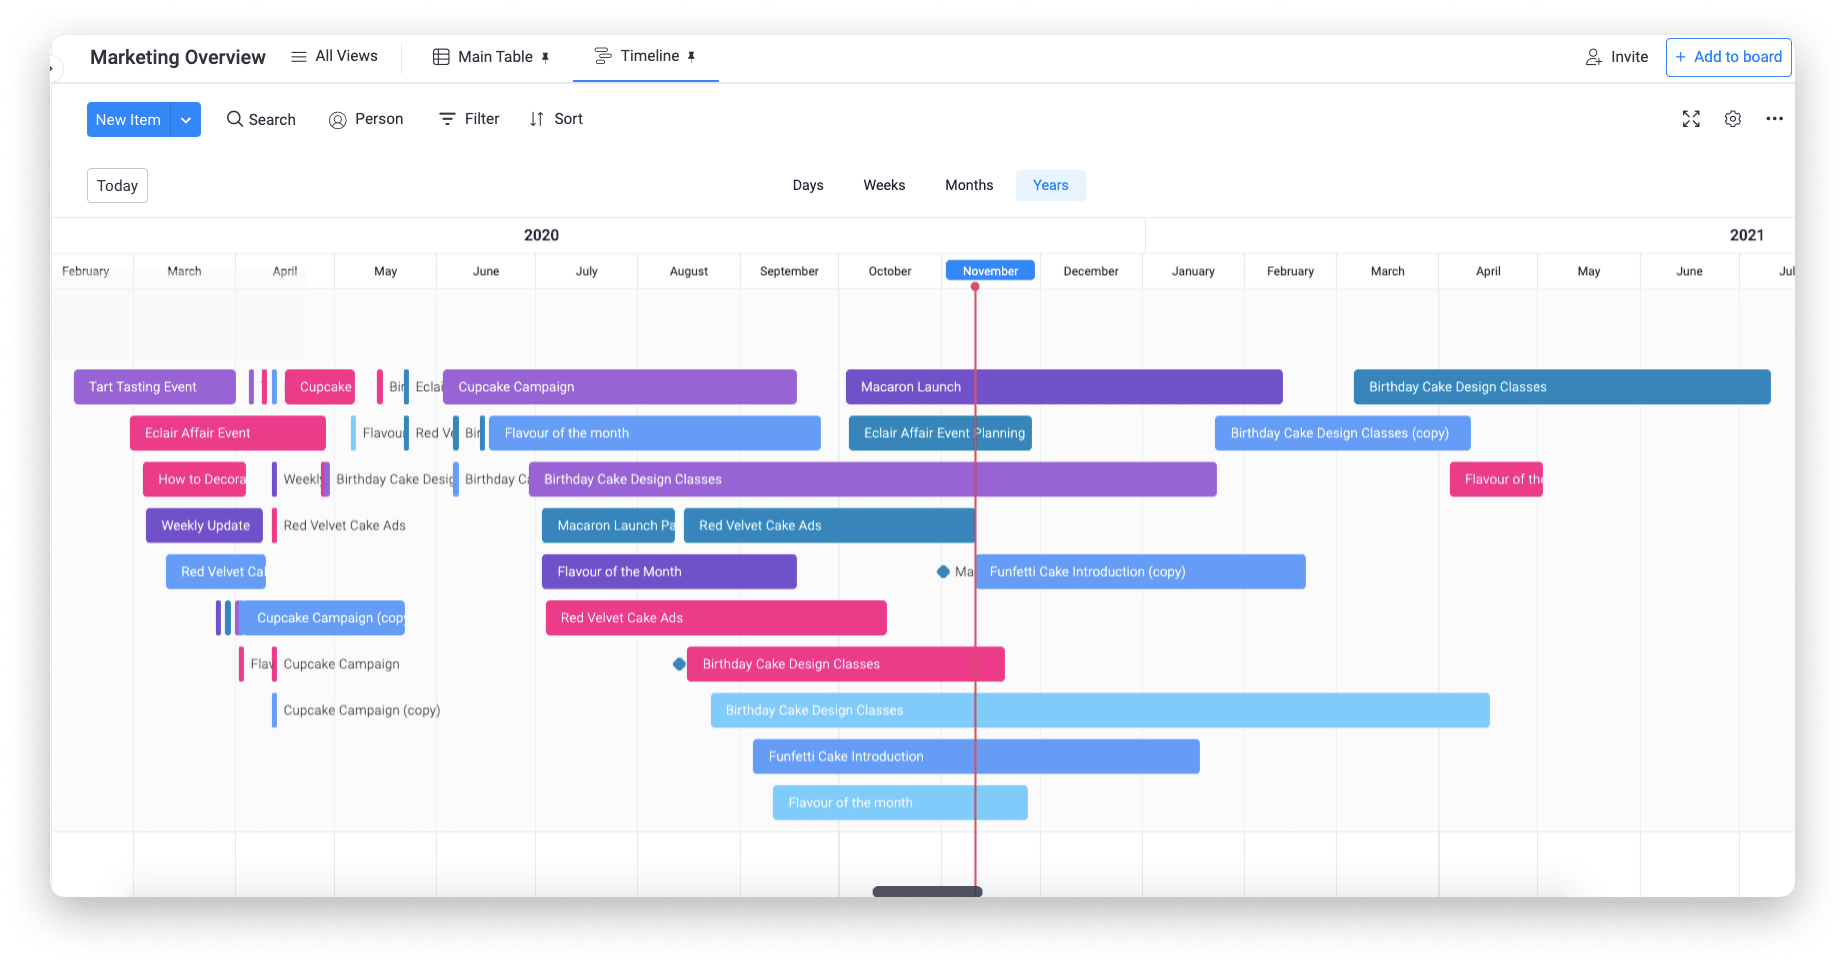 Timeline - Learn about this chart and tools to create it